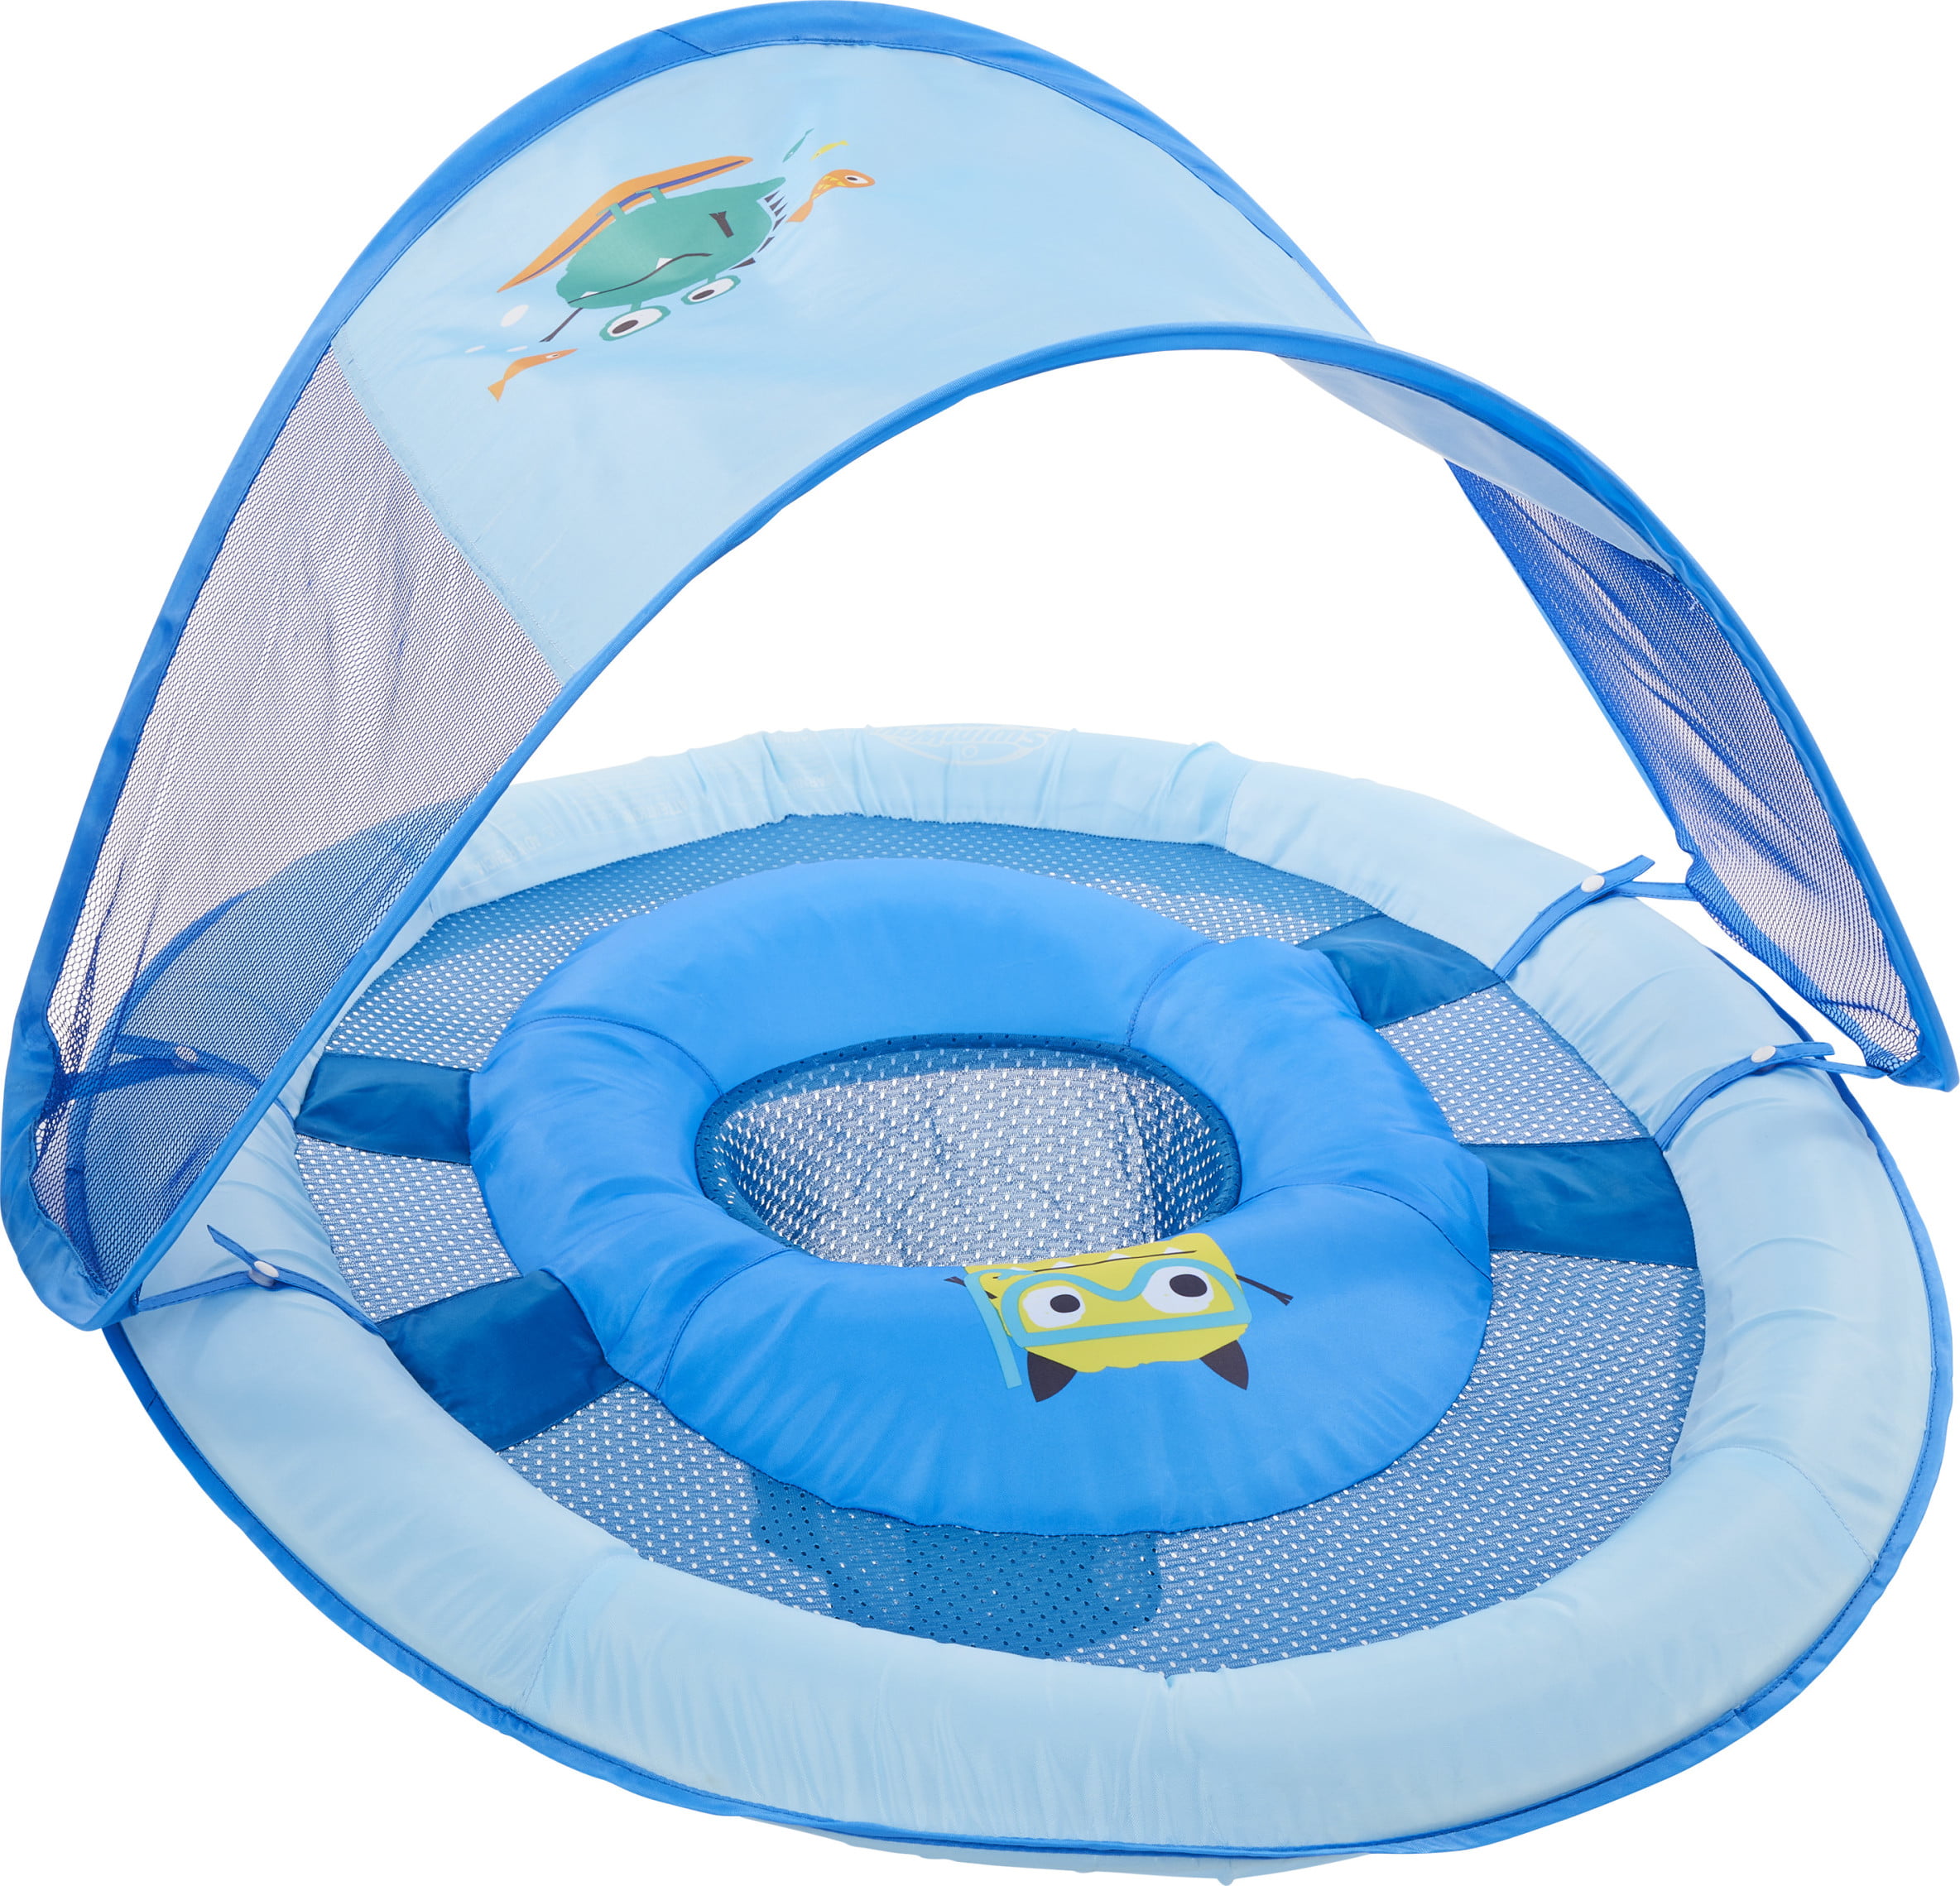 Slipper Inflatable Kid Swimming Ring Seat Float Boat Beach Water Pool Lounge Bed 